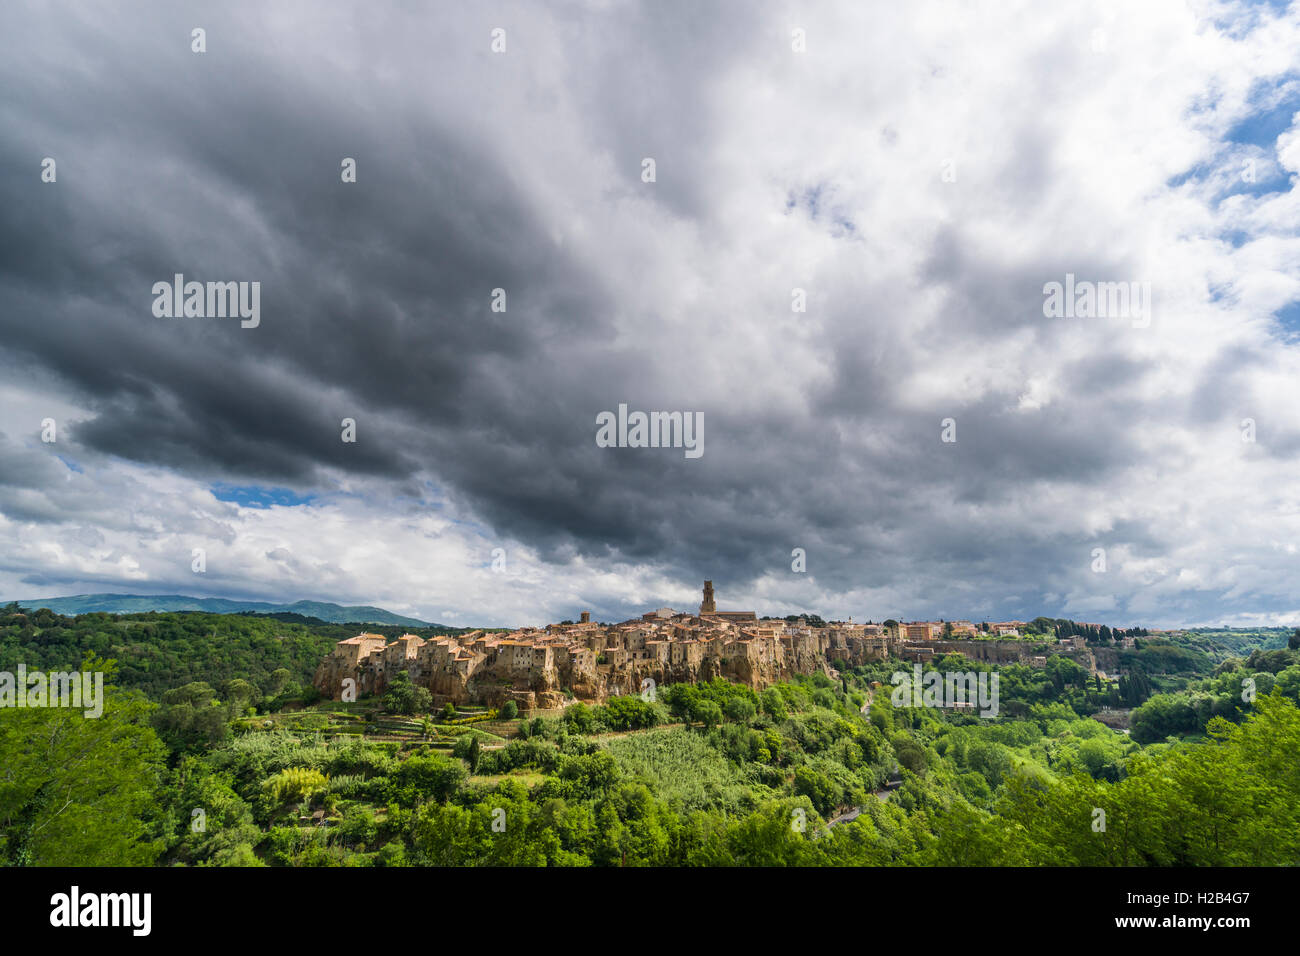 Town on hill and cloudy sky, Pitigliano, Tuscany, Italy Stock Photo